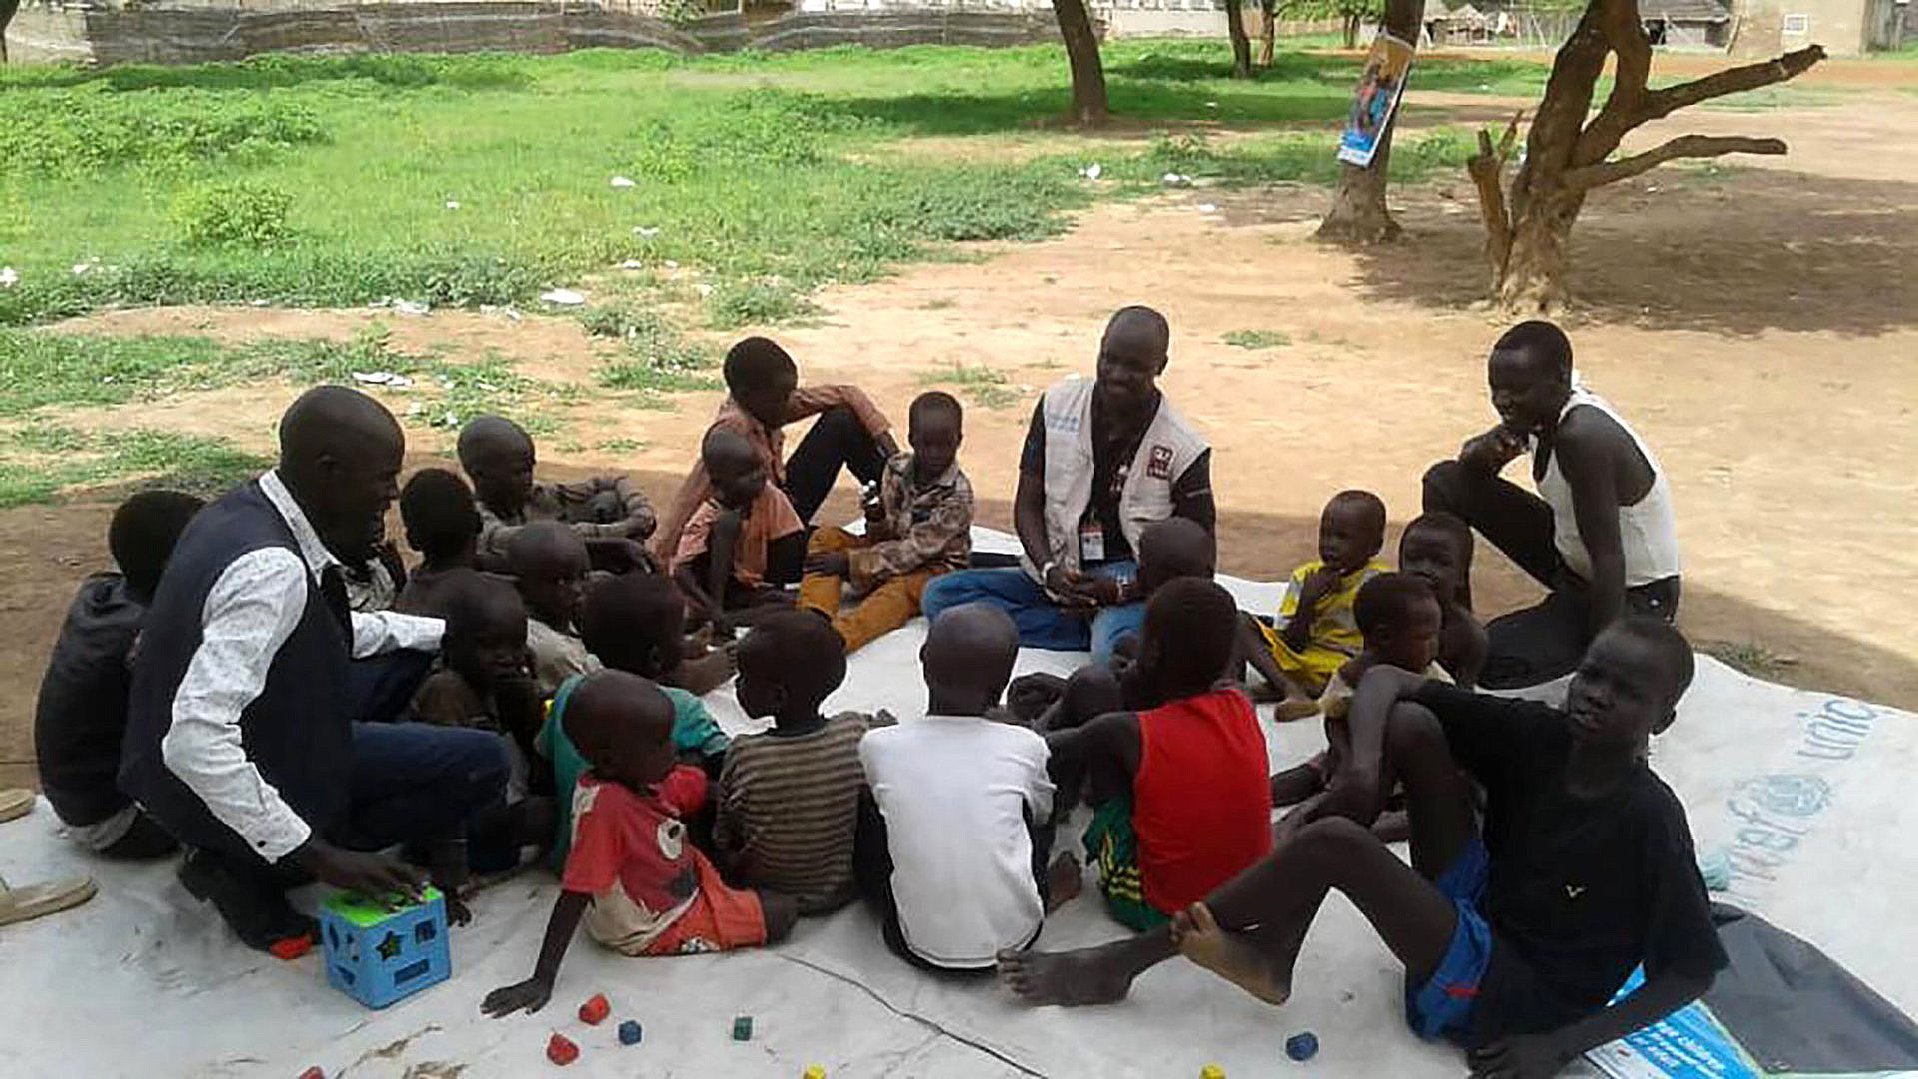 War child officer works on the field with children in South Sudan